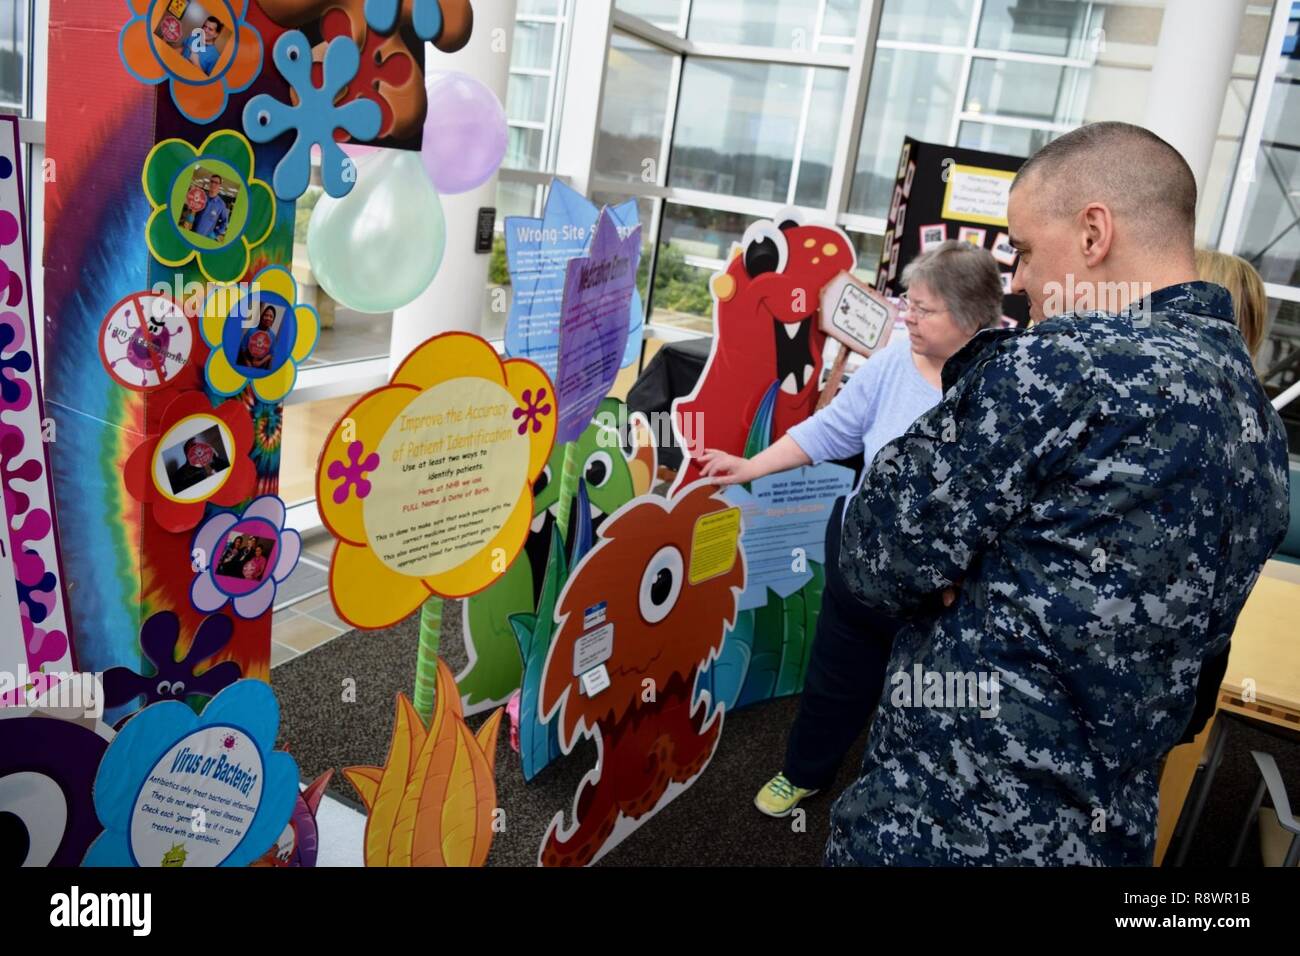 Naval Hospital Bremerton recognizes National Patient Safety Week  by reminding and educating staff, beneficiaries and visitors to 'Weed out  Germs,' with a colorful display specifically designed to catch everyone's  attention so they can in turn prevent infection Stock Photo